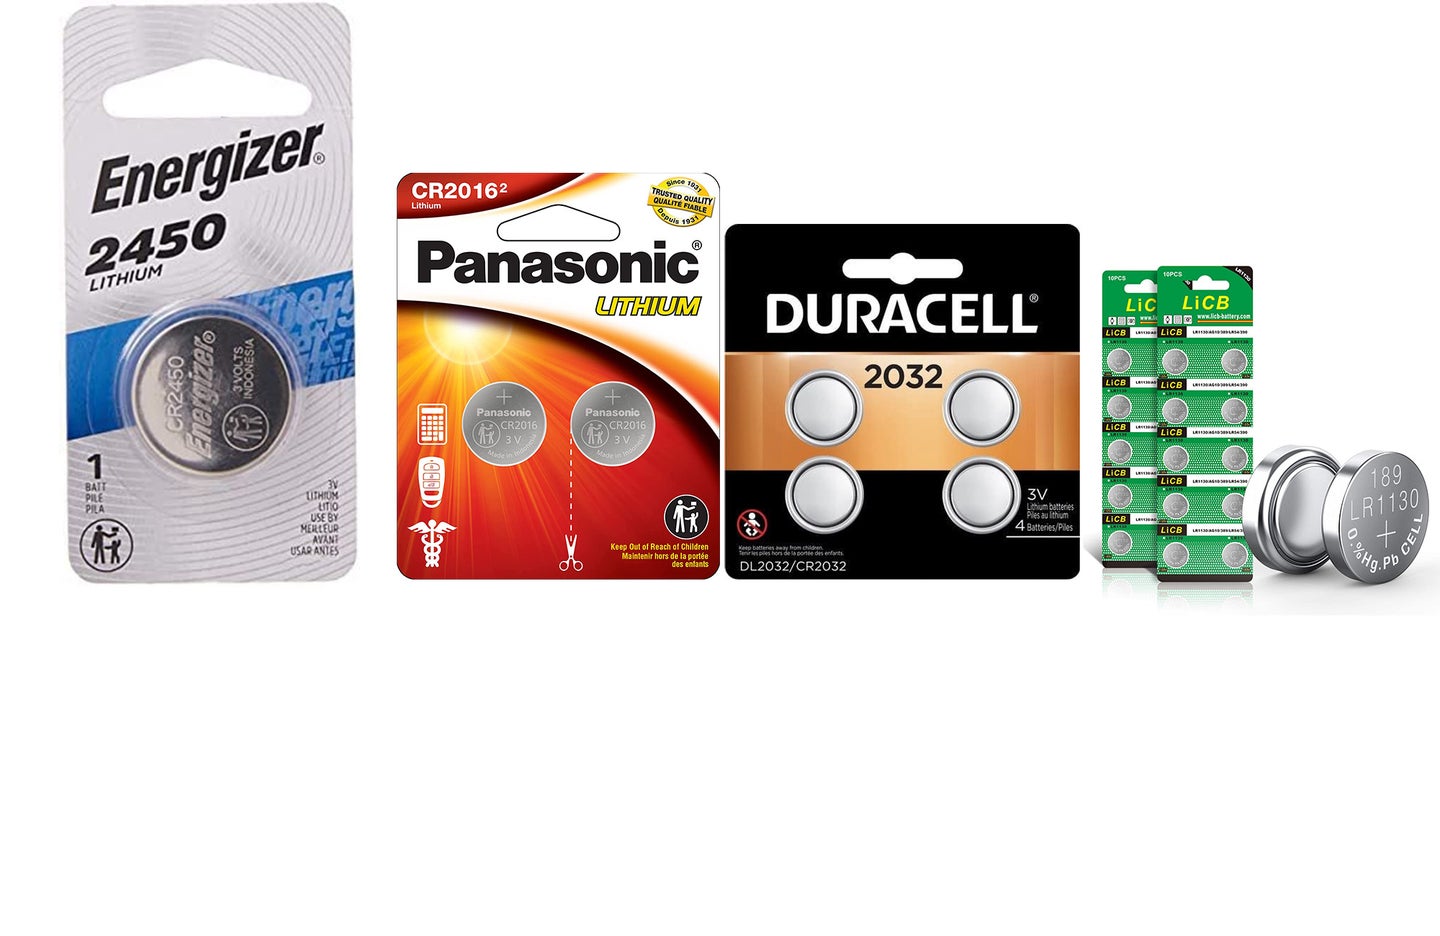 Keep your watches, remotes, and cameras ready to go with the best coin batteries.